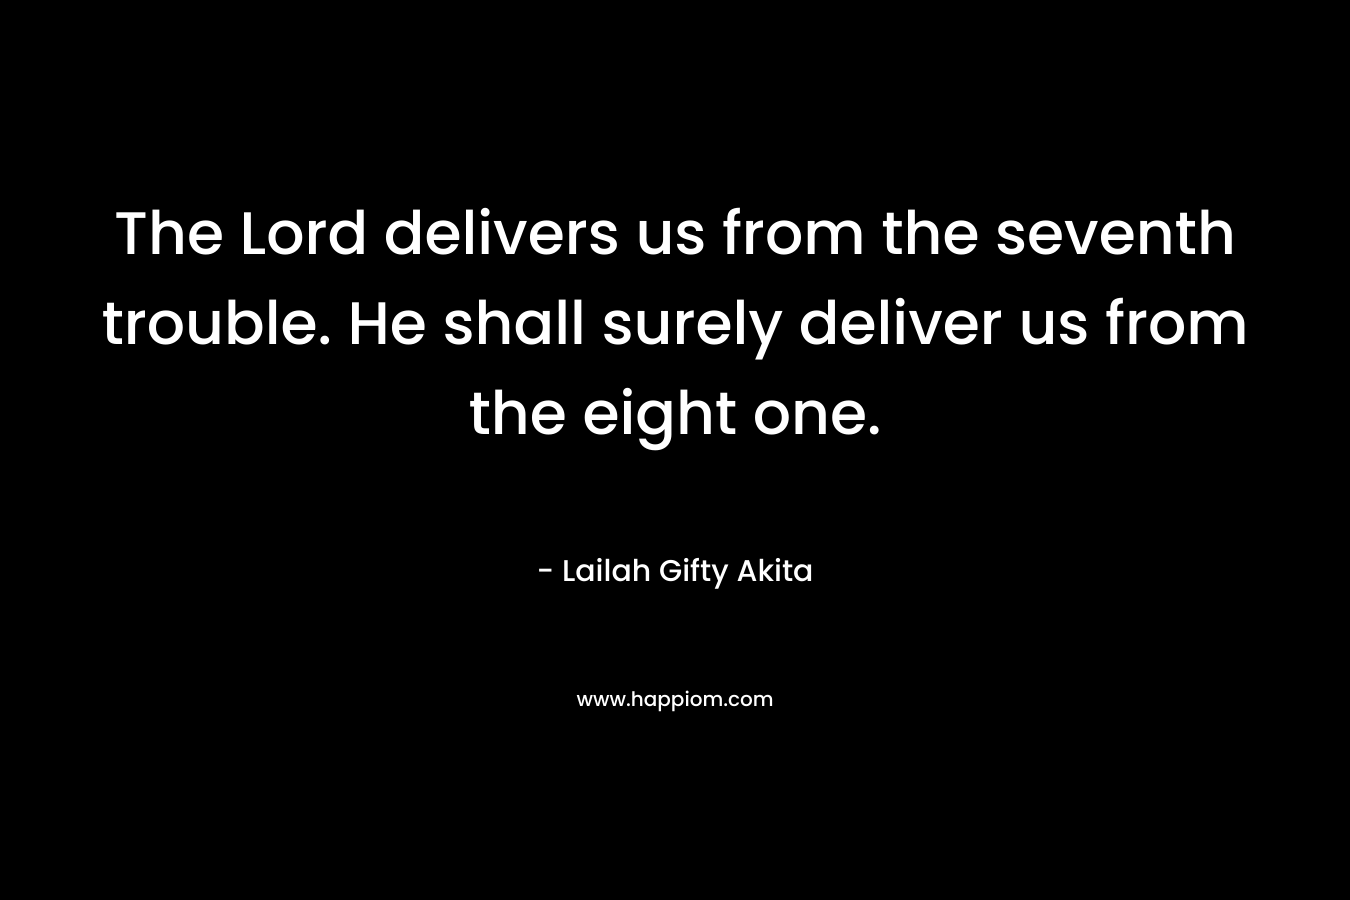 The Lord delivers us from the seventh trouble. He shall surely deliver us from the eight one.